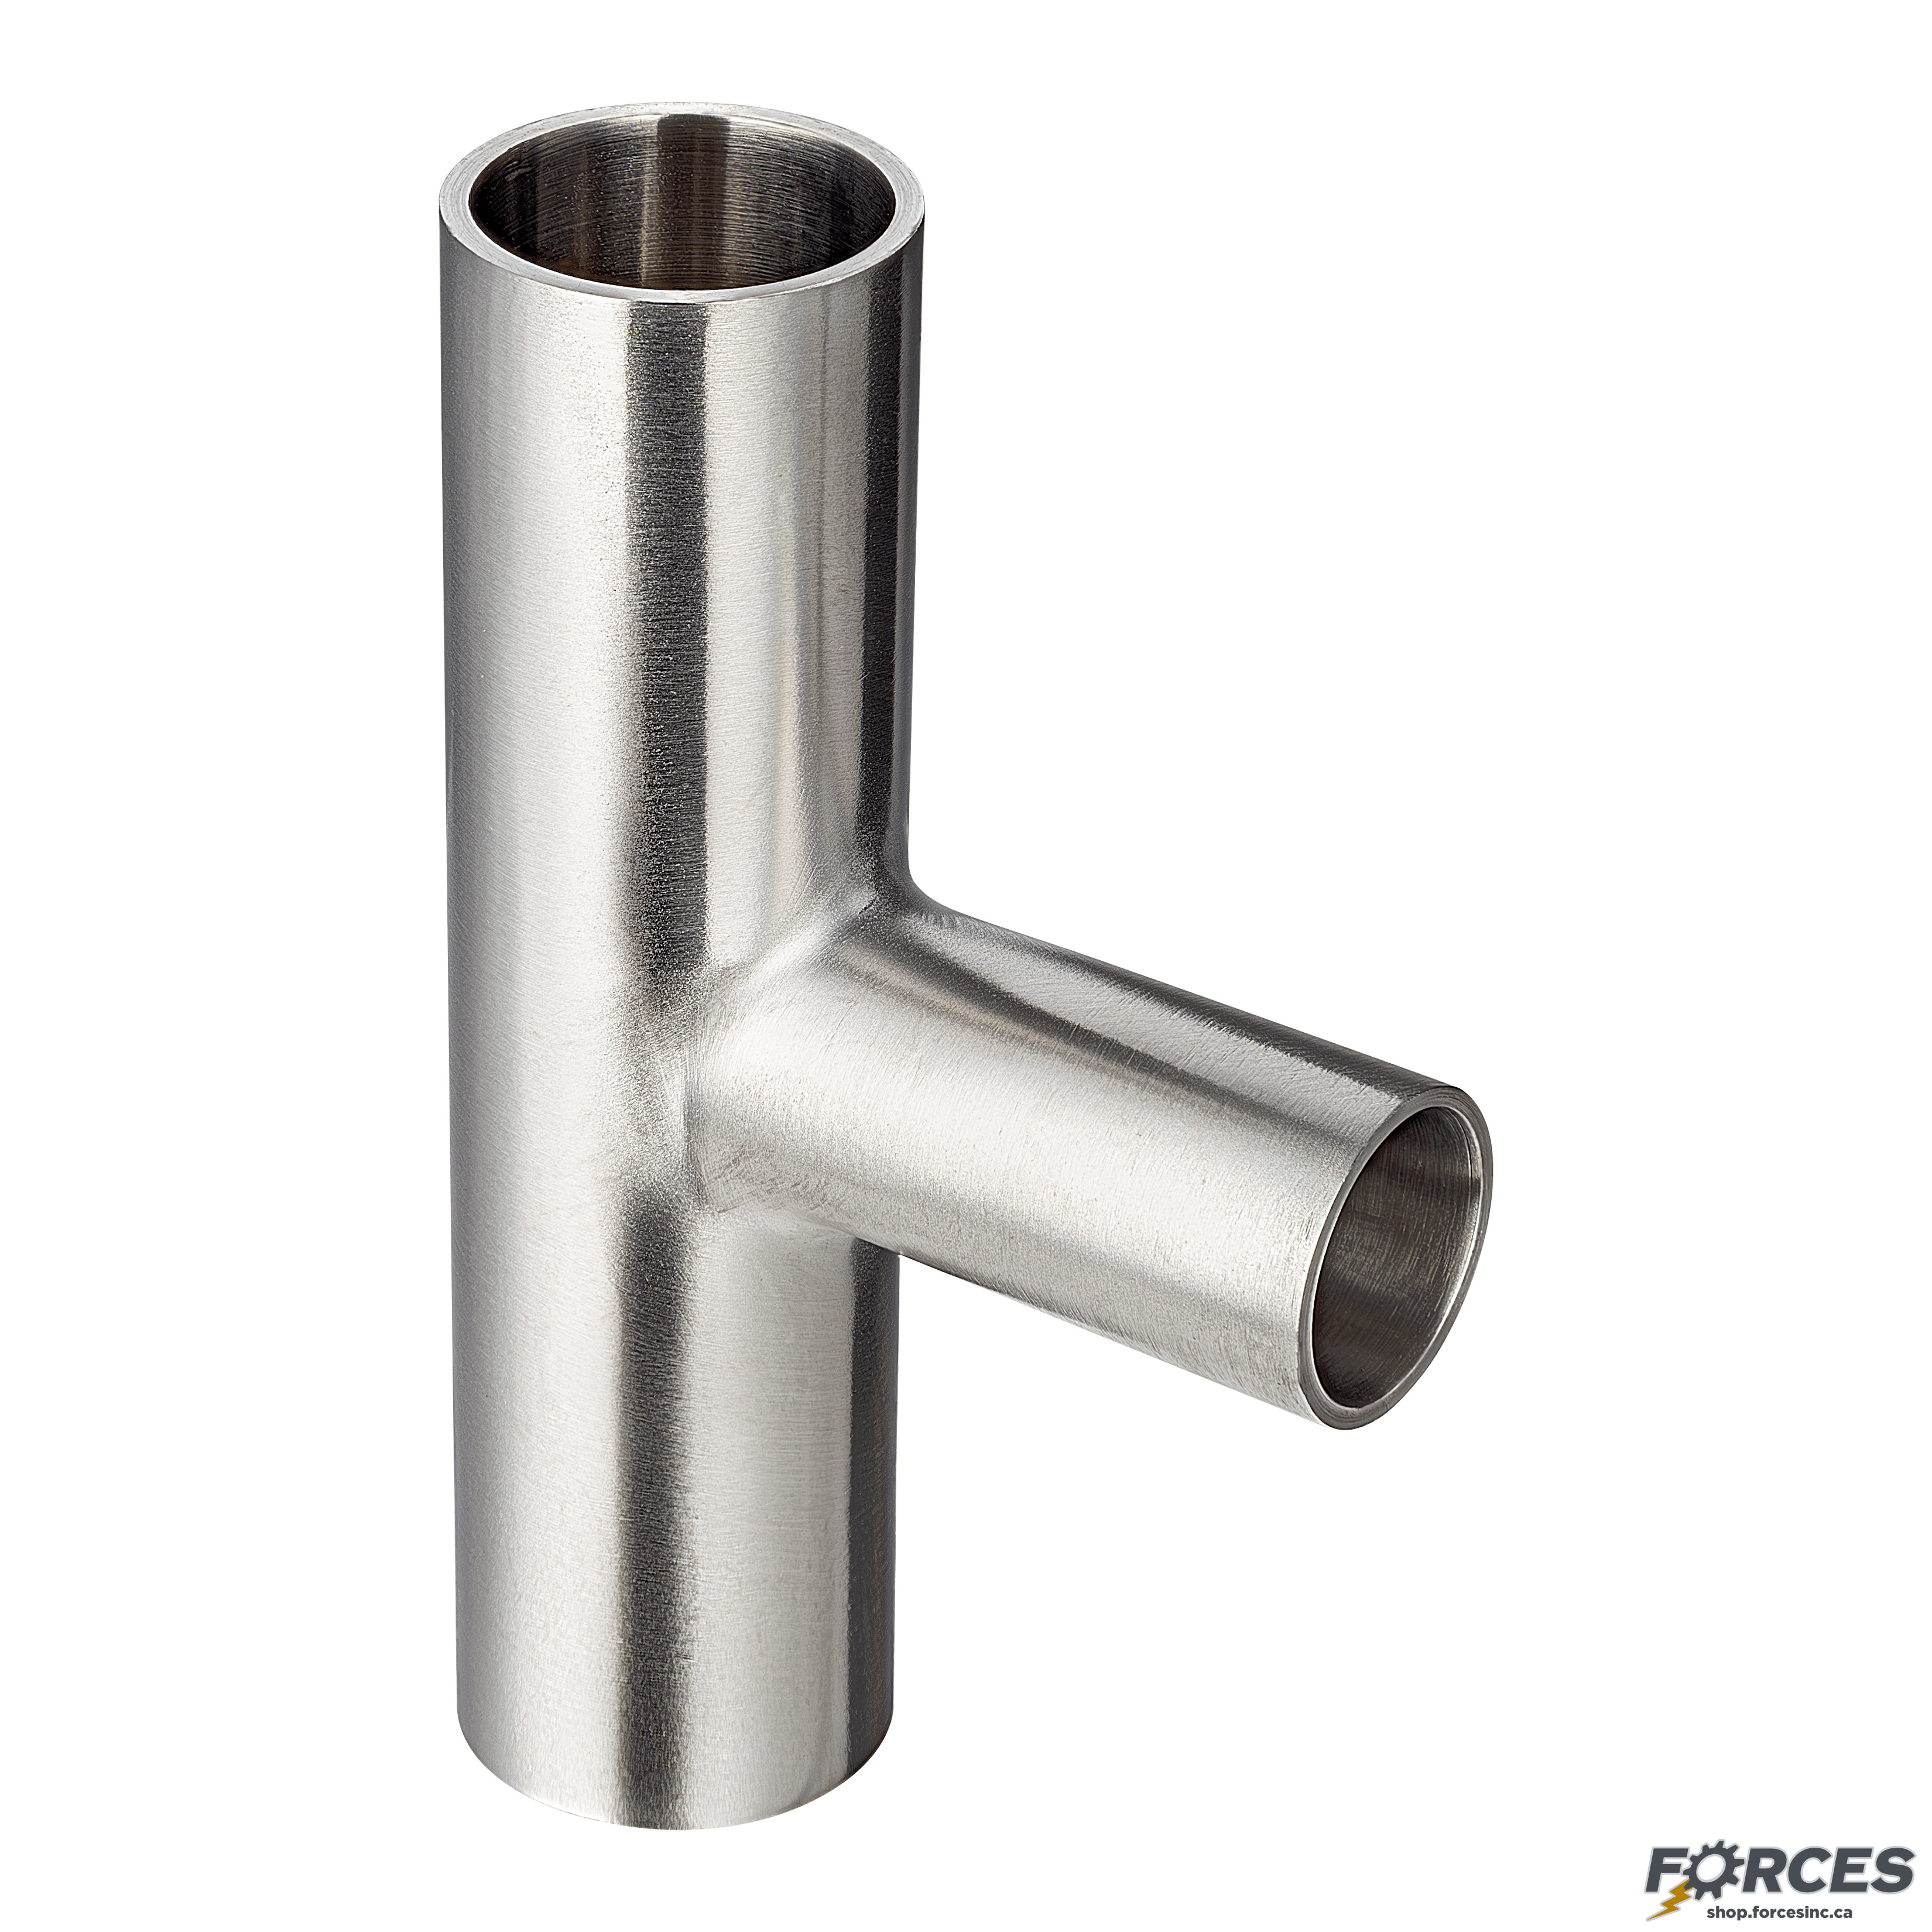 2-1/2" x 2" Butt Weld Tee Reducer - Stainless Steel 304 - Forces Inc